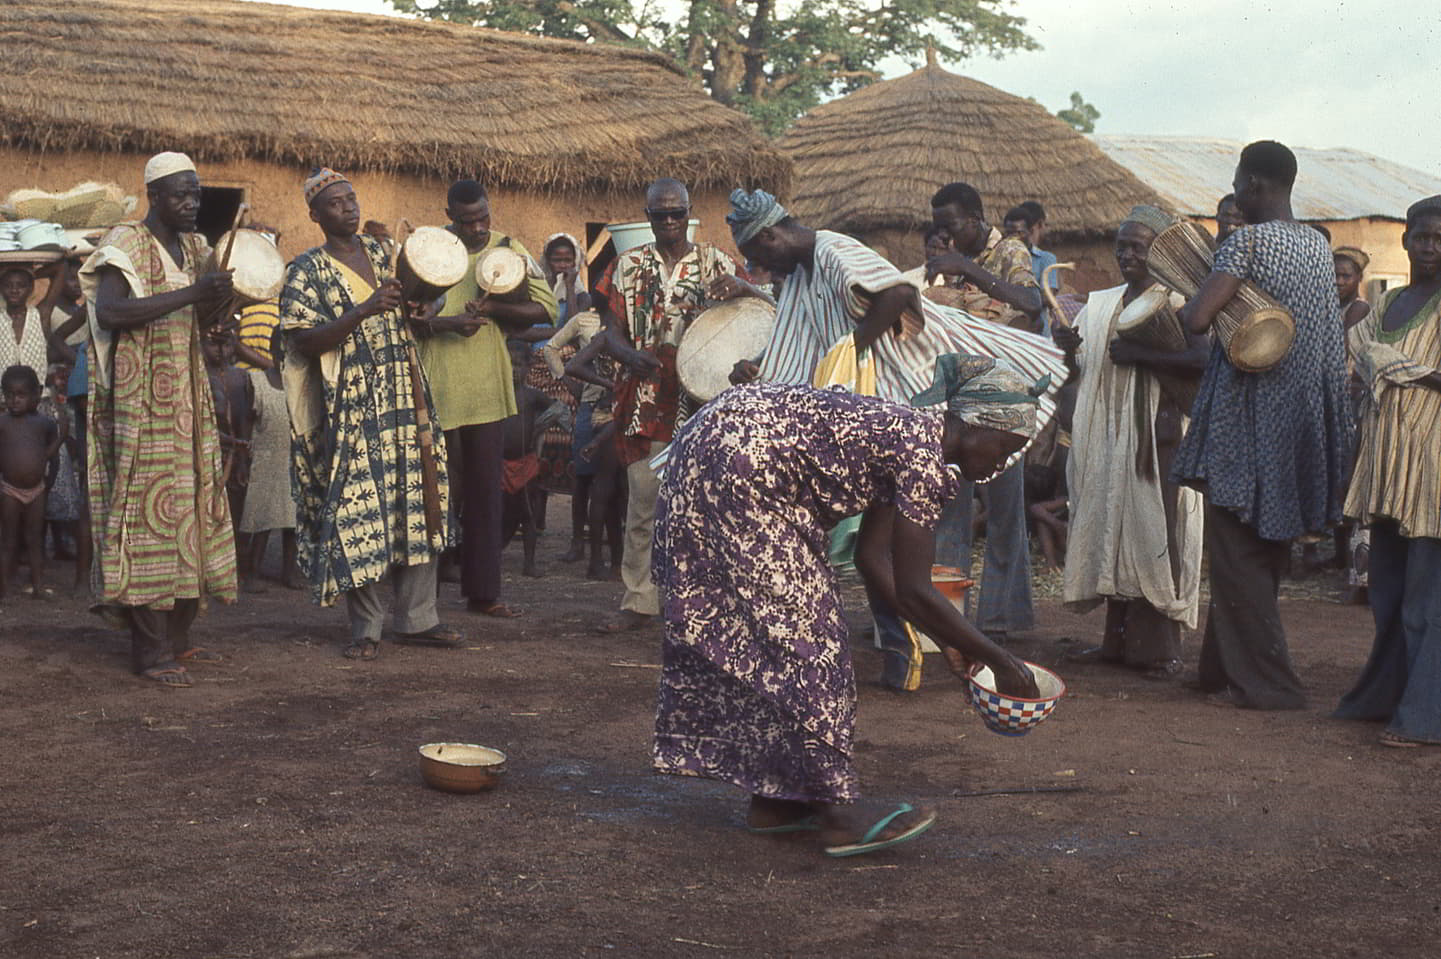 http://www.adrummerstestament.com/images/spreading water before Takai dance